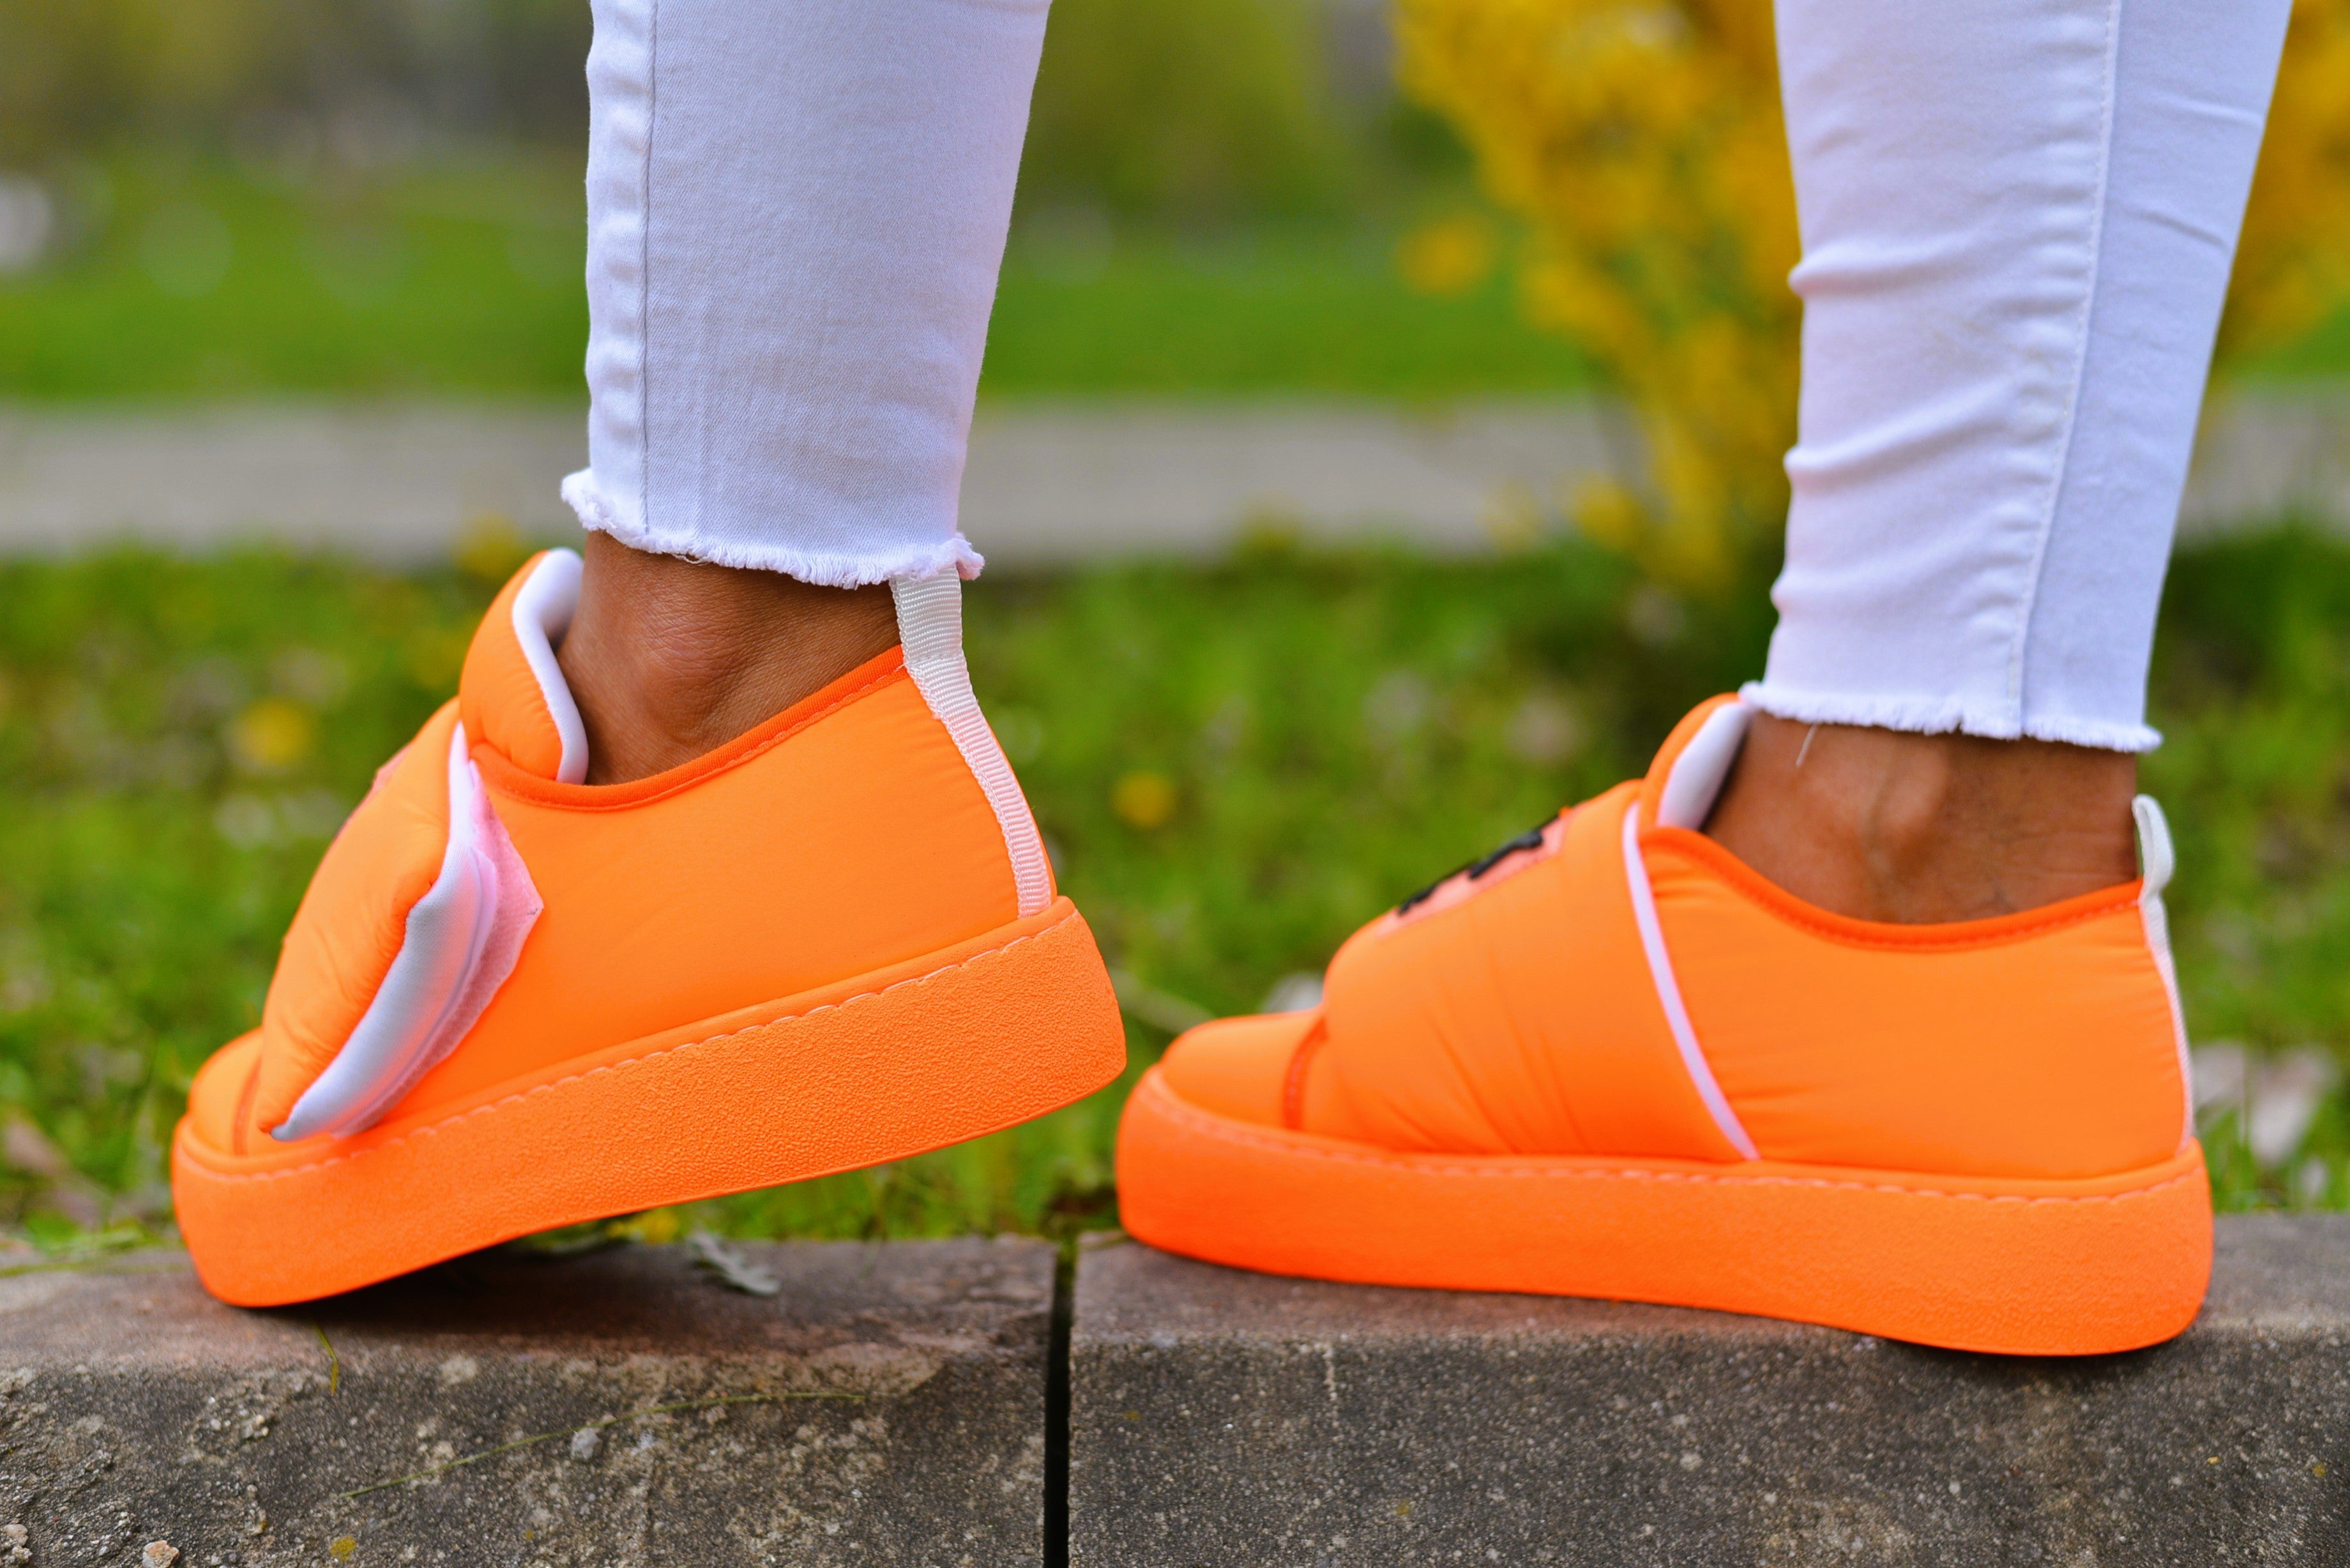 Women's Orange Neon Priscila Sneakers Shoes Made of Textile Material